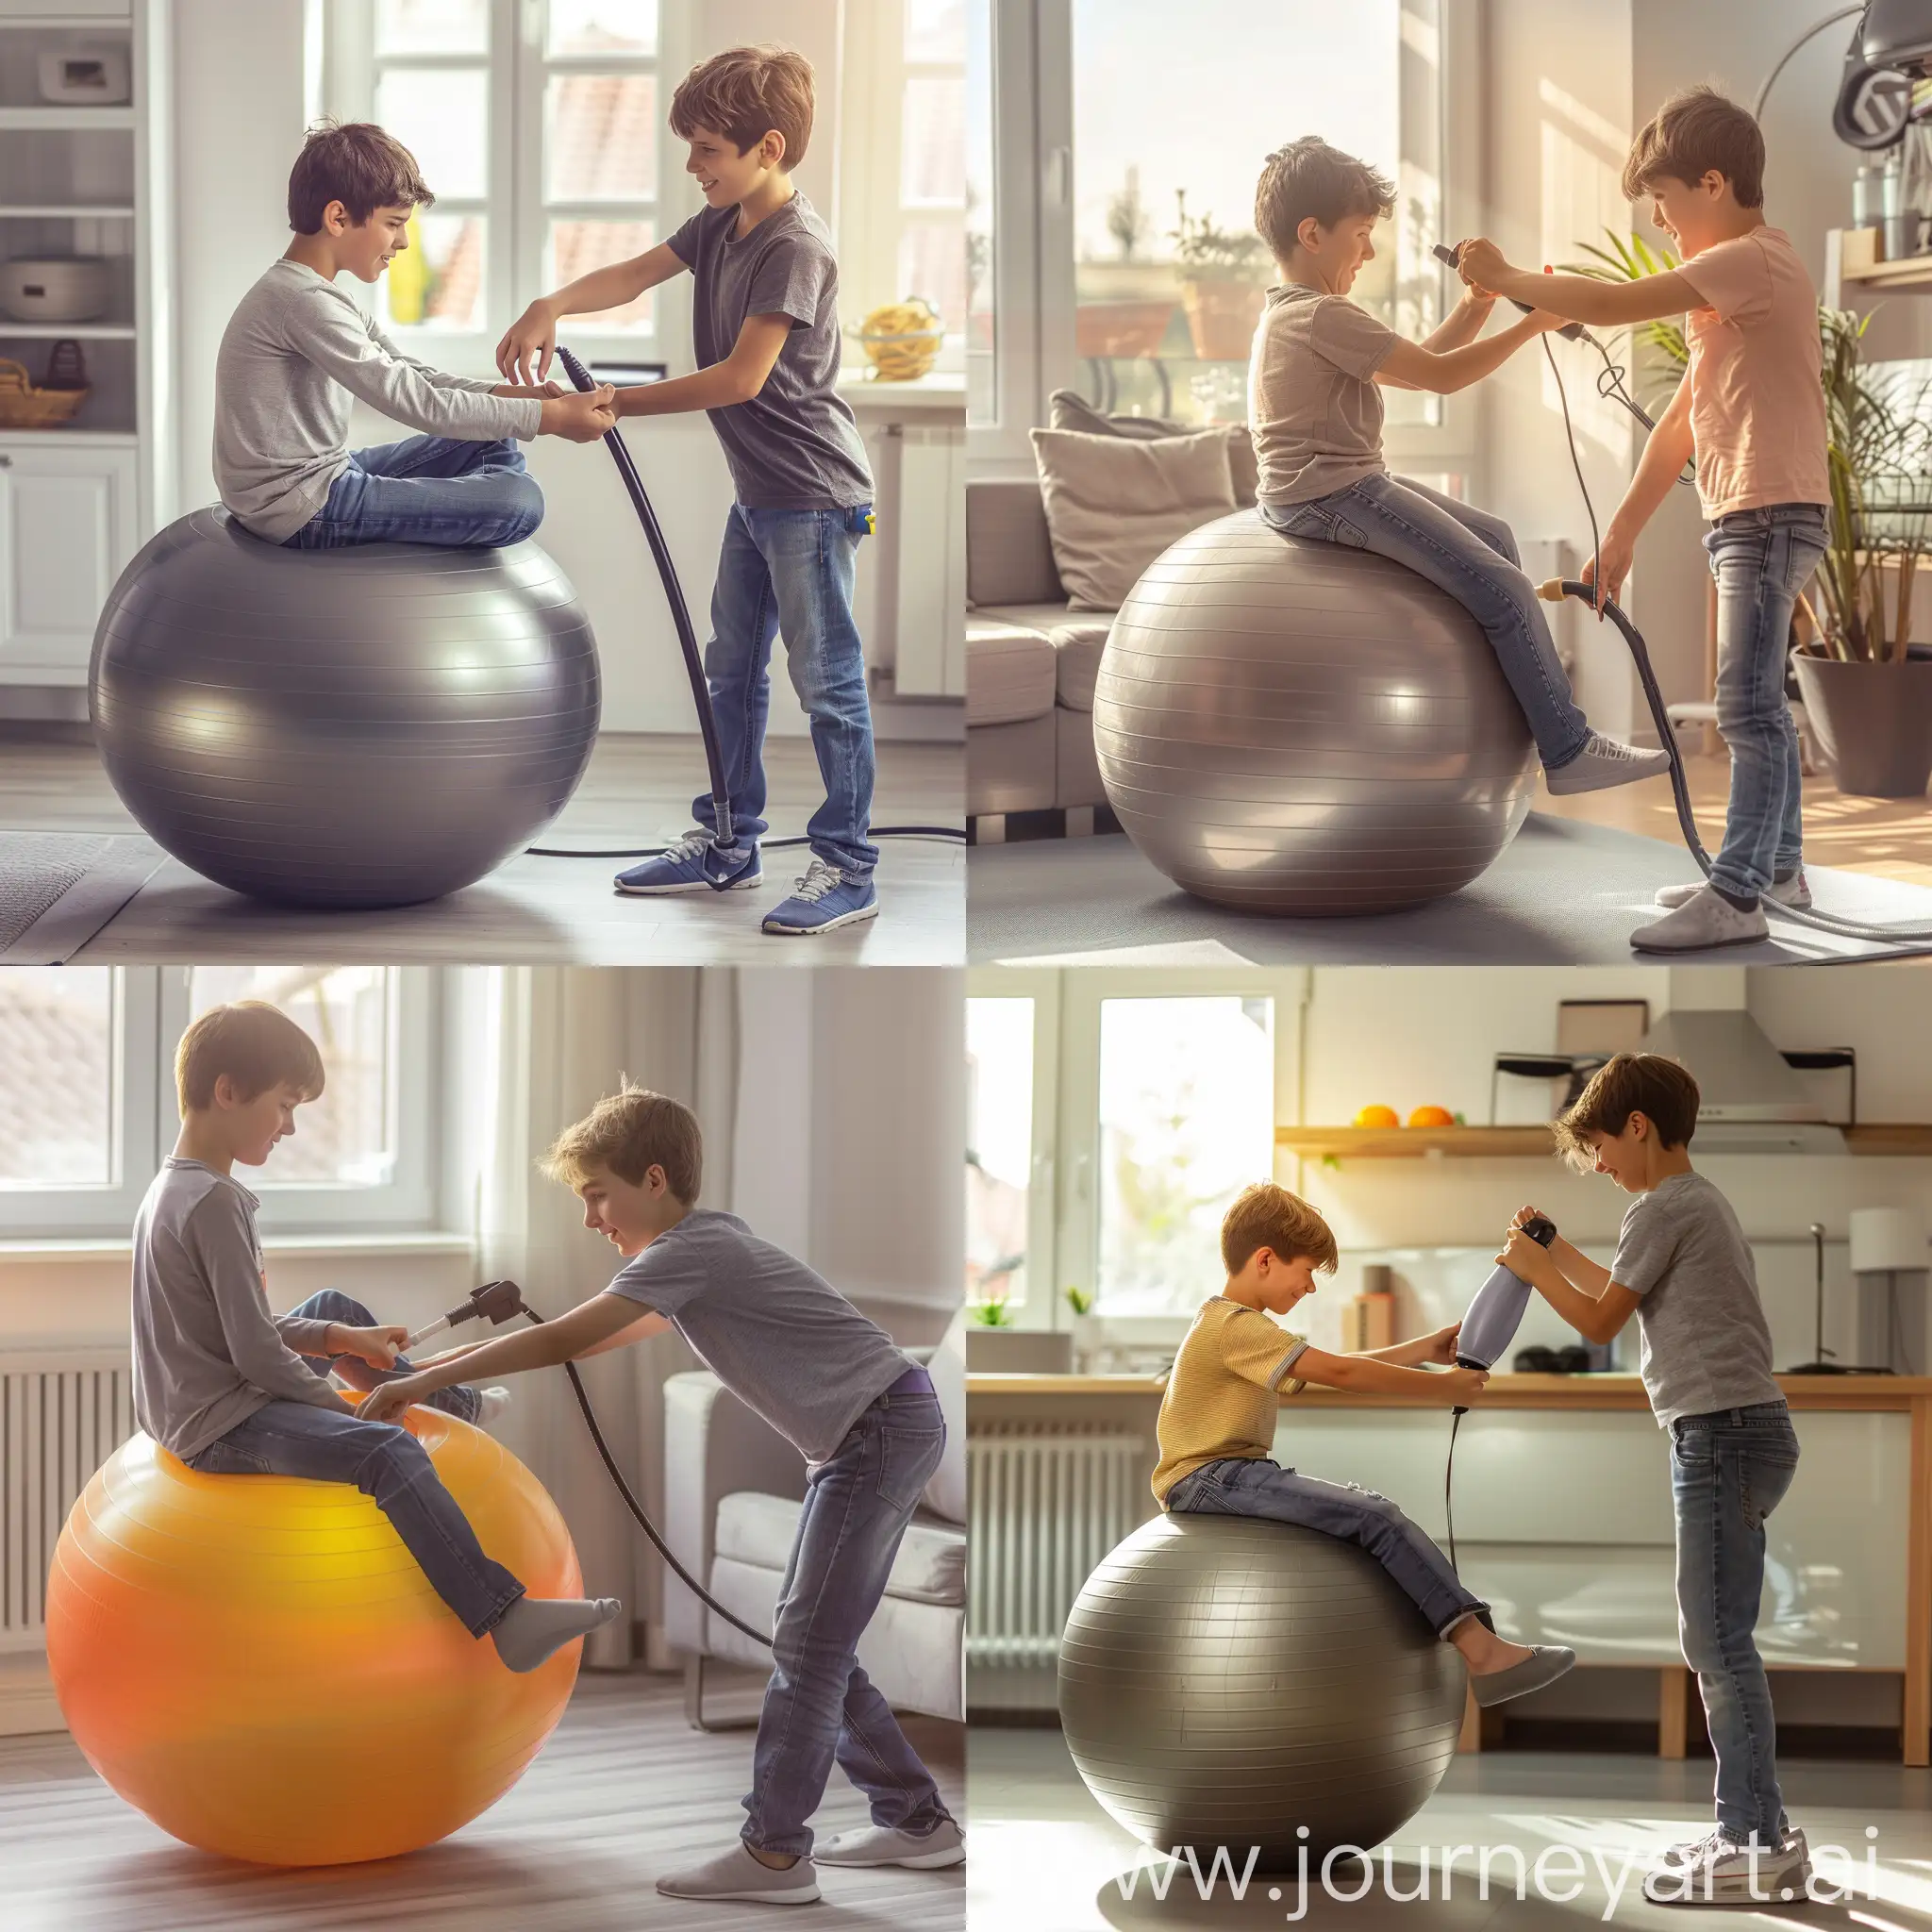 Two 13 year old teenage boys in jeans are shown from a side view, one sitting on a maximally inflated yoga ball in a room filled with natural light, the other one standing next to it with his hands pushing on the handle of a hand air pump to inflate the yoga ball even further.